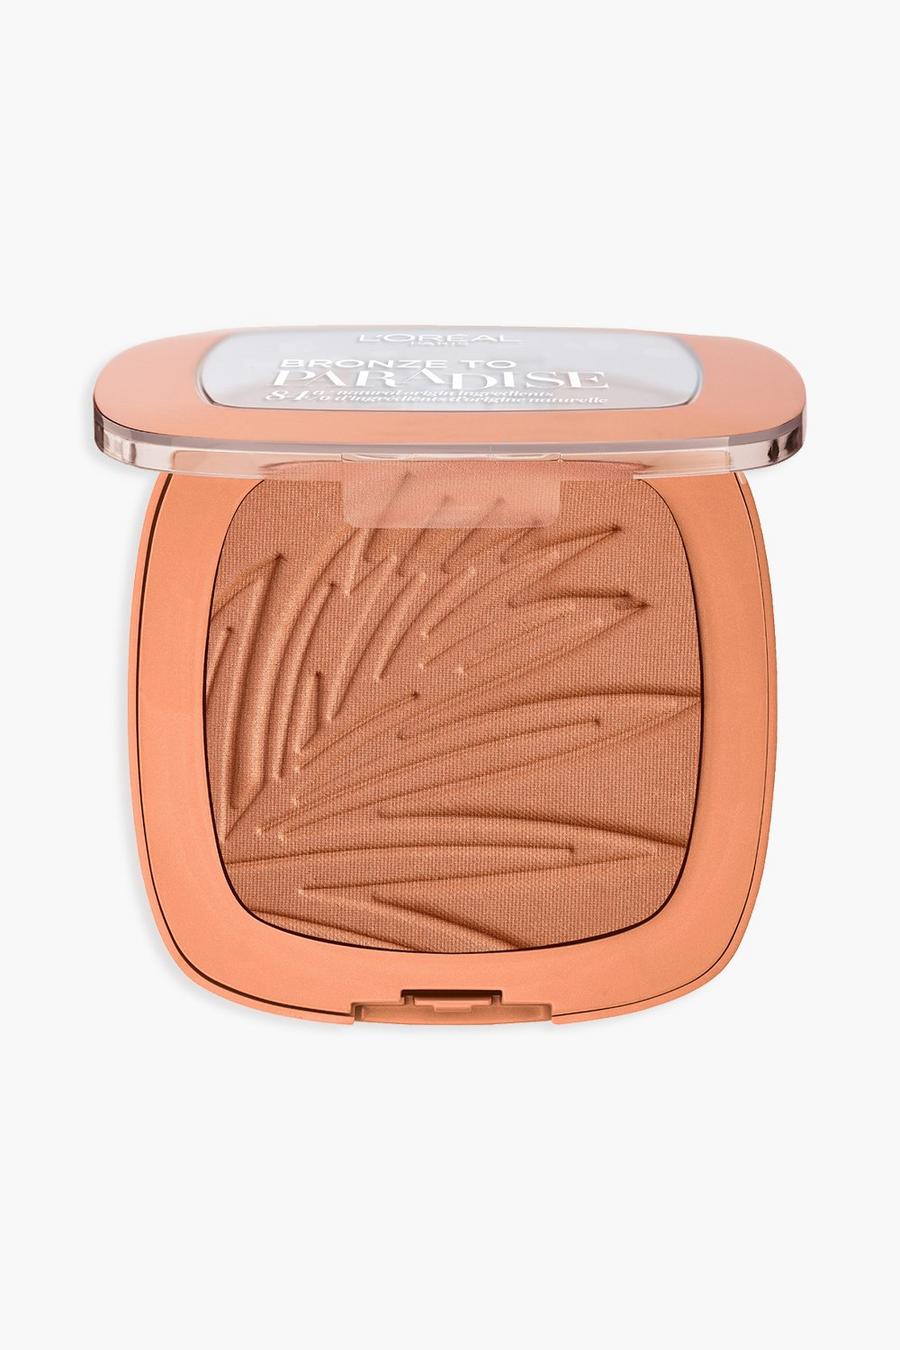 L'Oreal P Paradise Bronzer in povere, Bronze image number 1